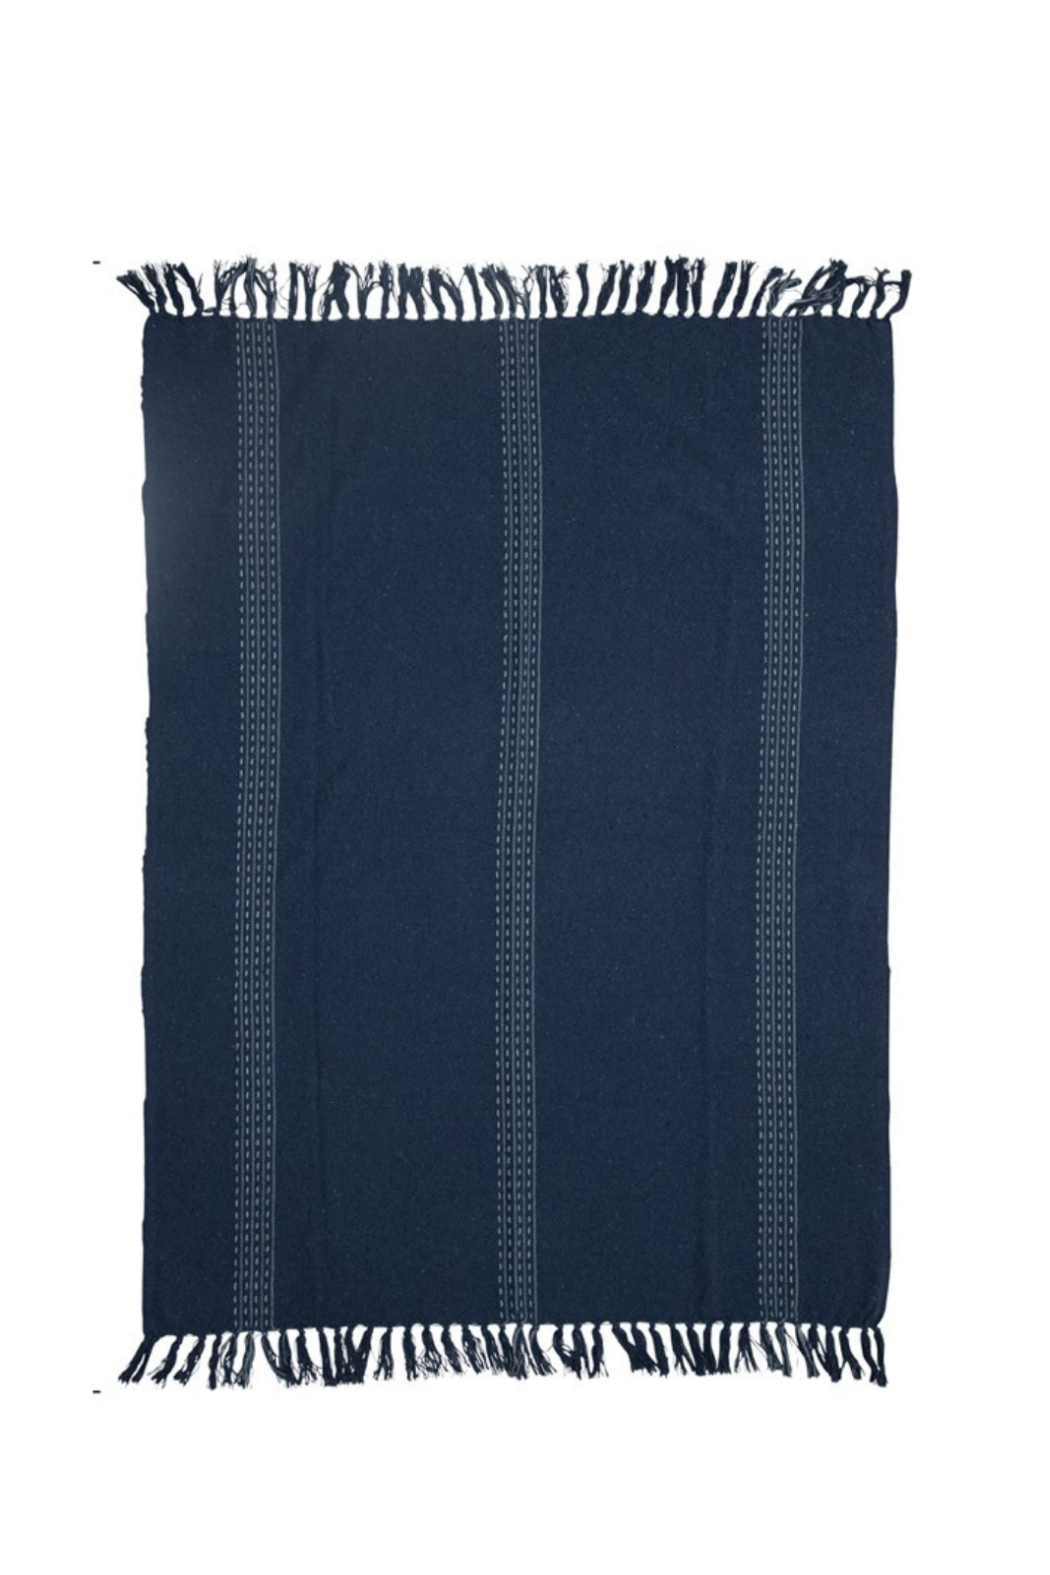 Blue + White Striped Throw with Fringe